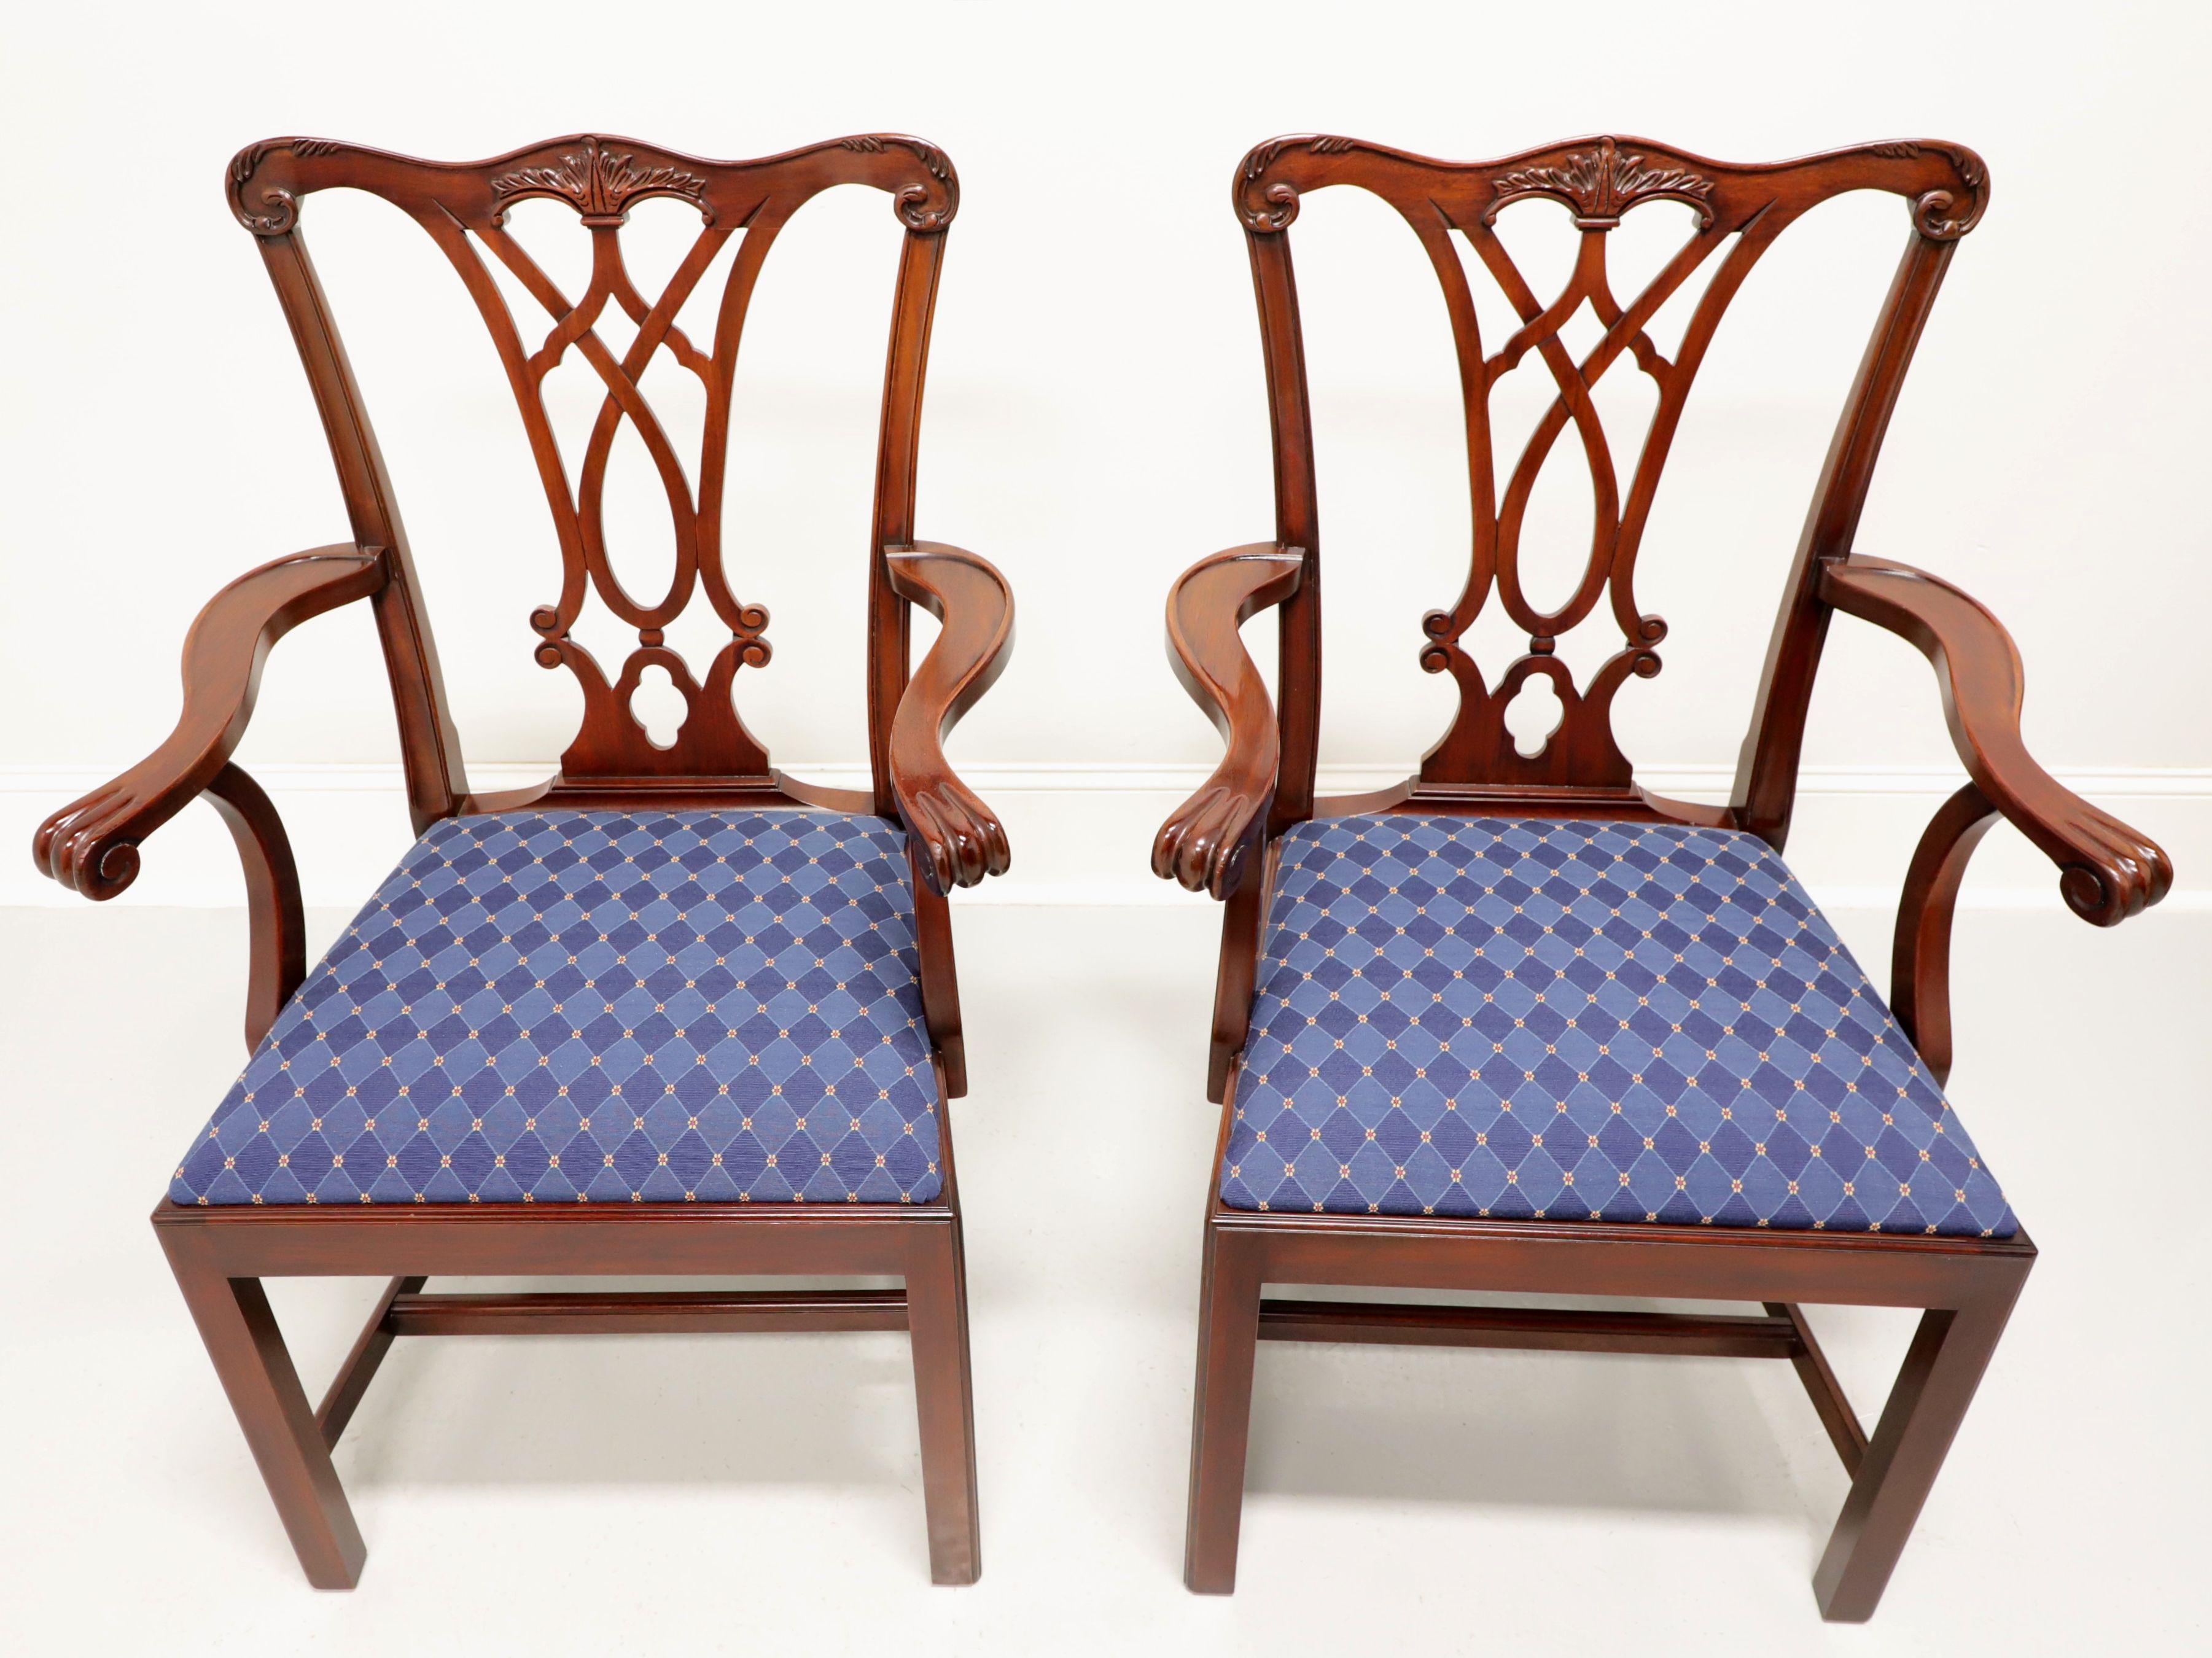 A pair of Chippendale style dining armchairs by Henkel Harris, of Winchester, Virginia, USA. Solid Mahogany, carved crest rail, backrest, scroll arms, straight legs and stretchers. Seats upholstered in a blue colored diamond patterned fabric. Made